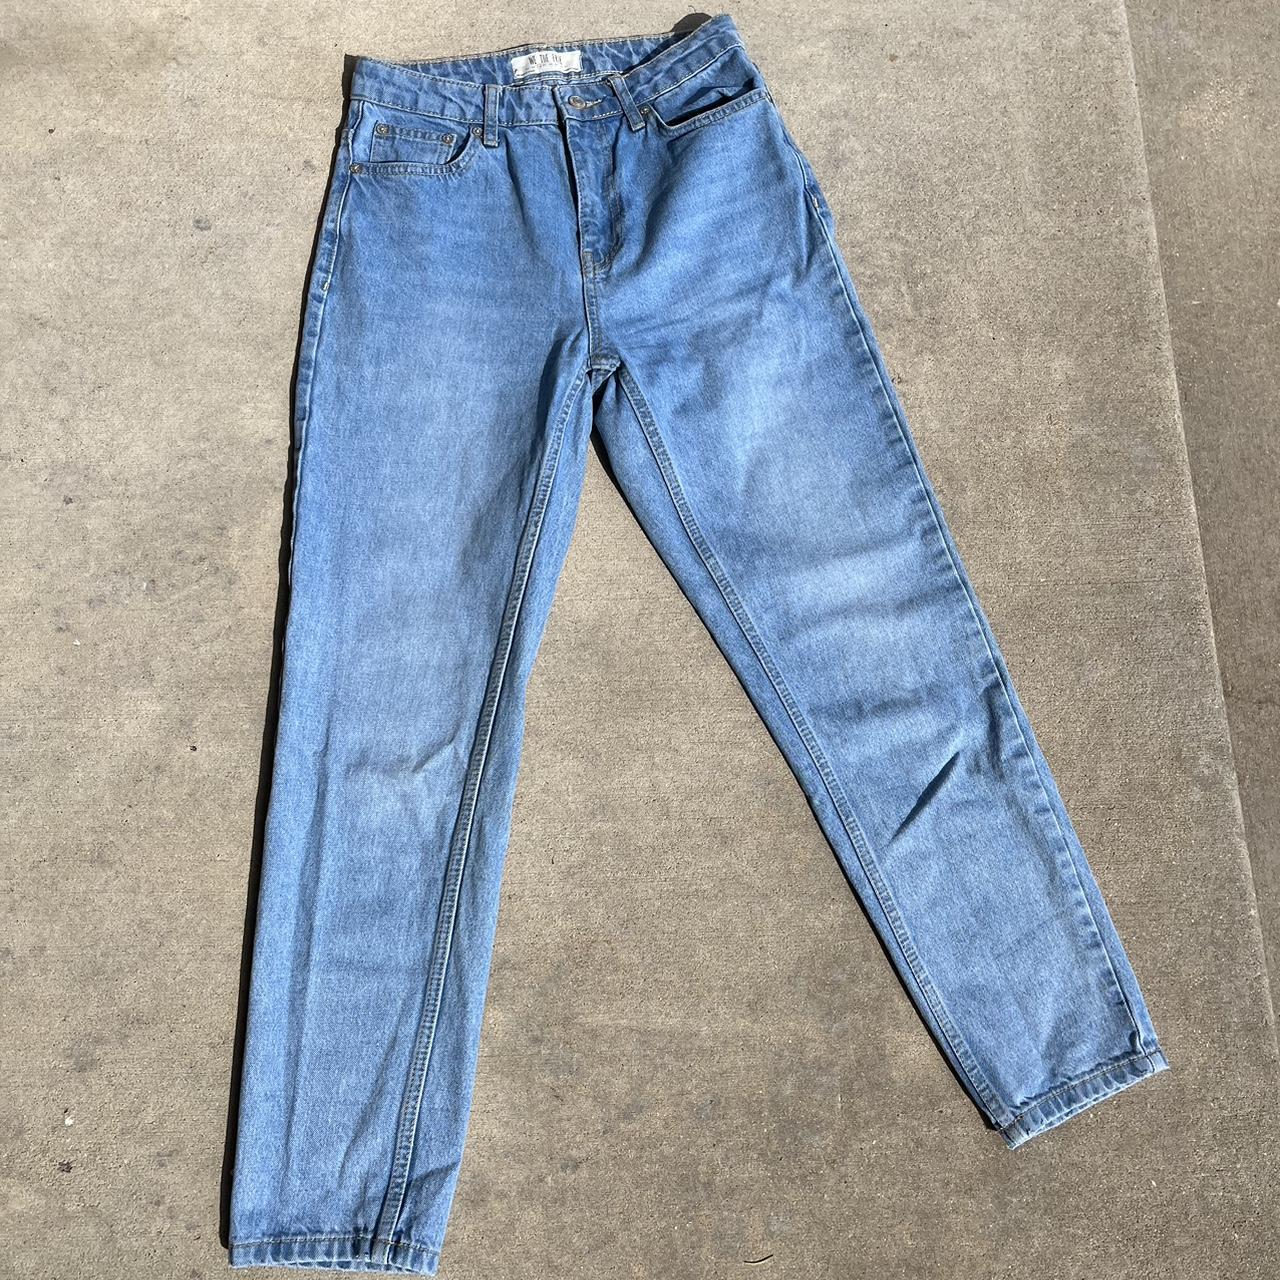 Free People Men's Blue and White Jeans | Depop